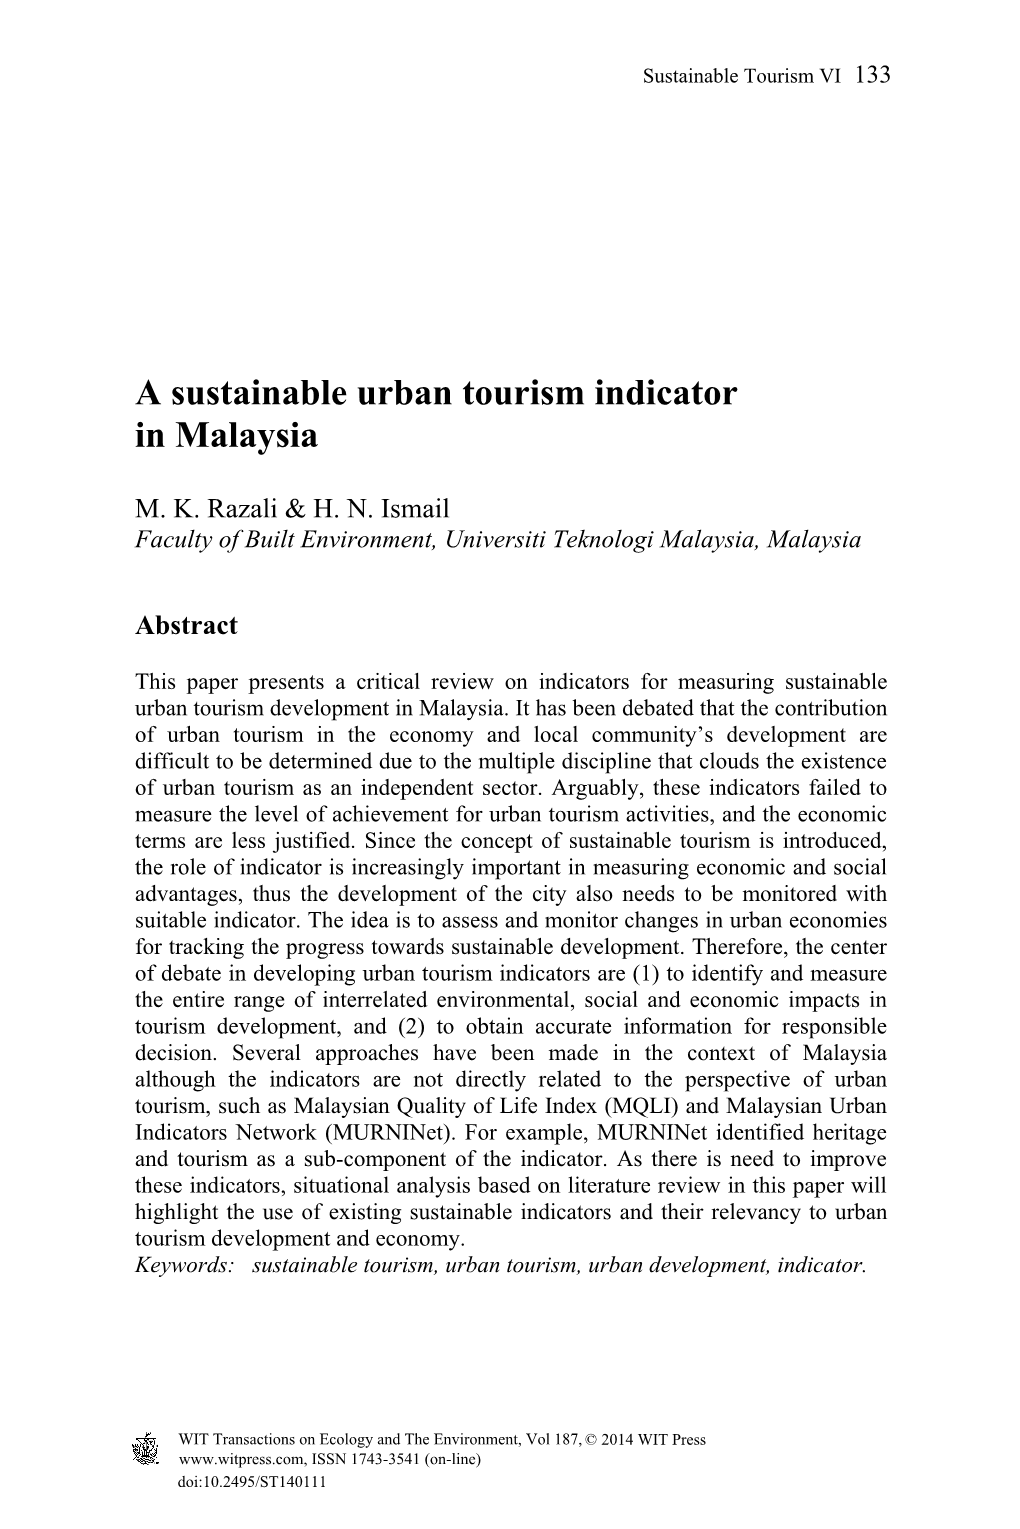 A Sustainable Urban Tourism Indicator in Malaysia